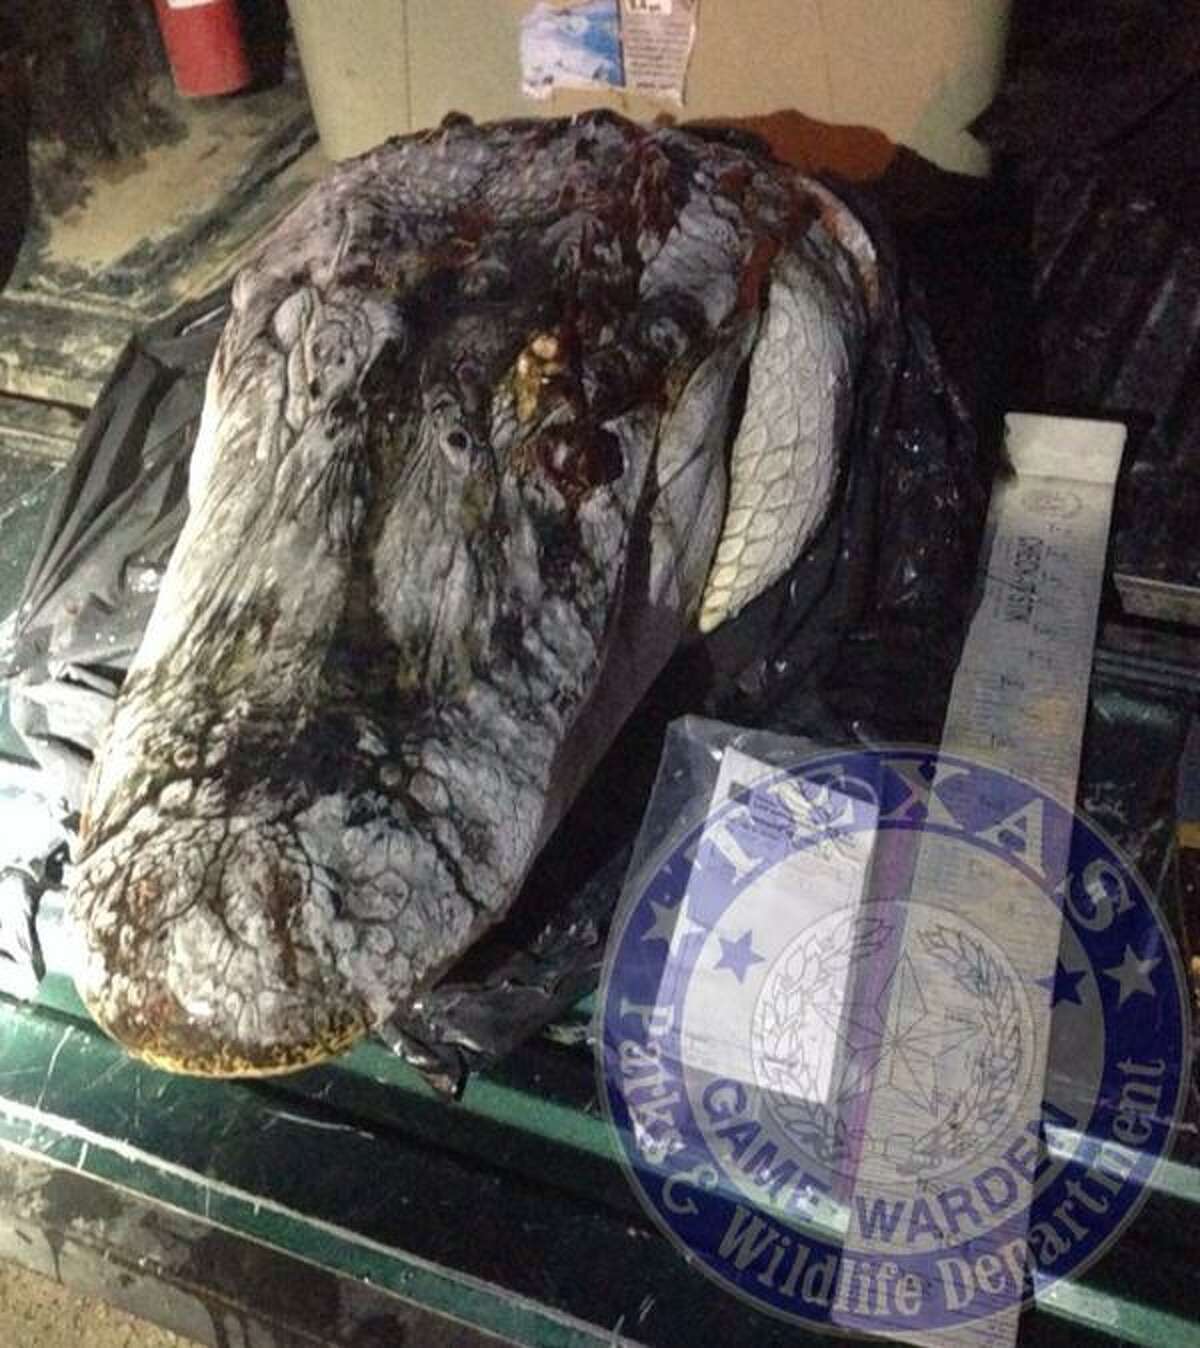 Texas Game Warden's Twitter account shared this photo of an alligator shot and killed last week in Atascosa County. The man responsible has been charged with shooting the alligator out of season, a Class C misdemeanor punishable by a fine up to $500.